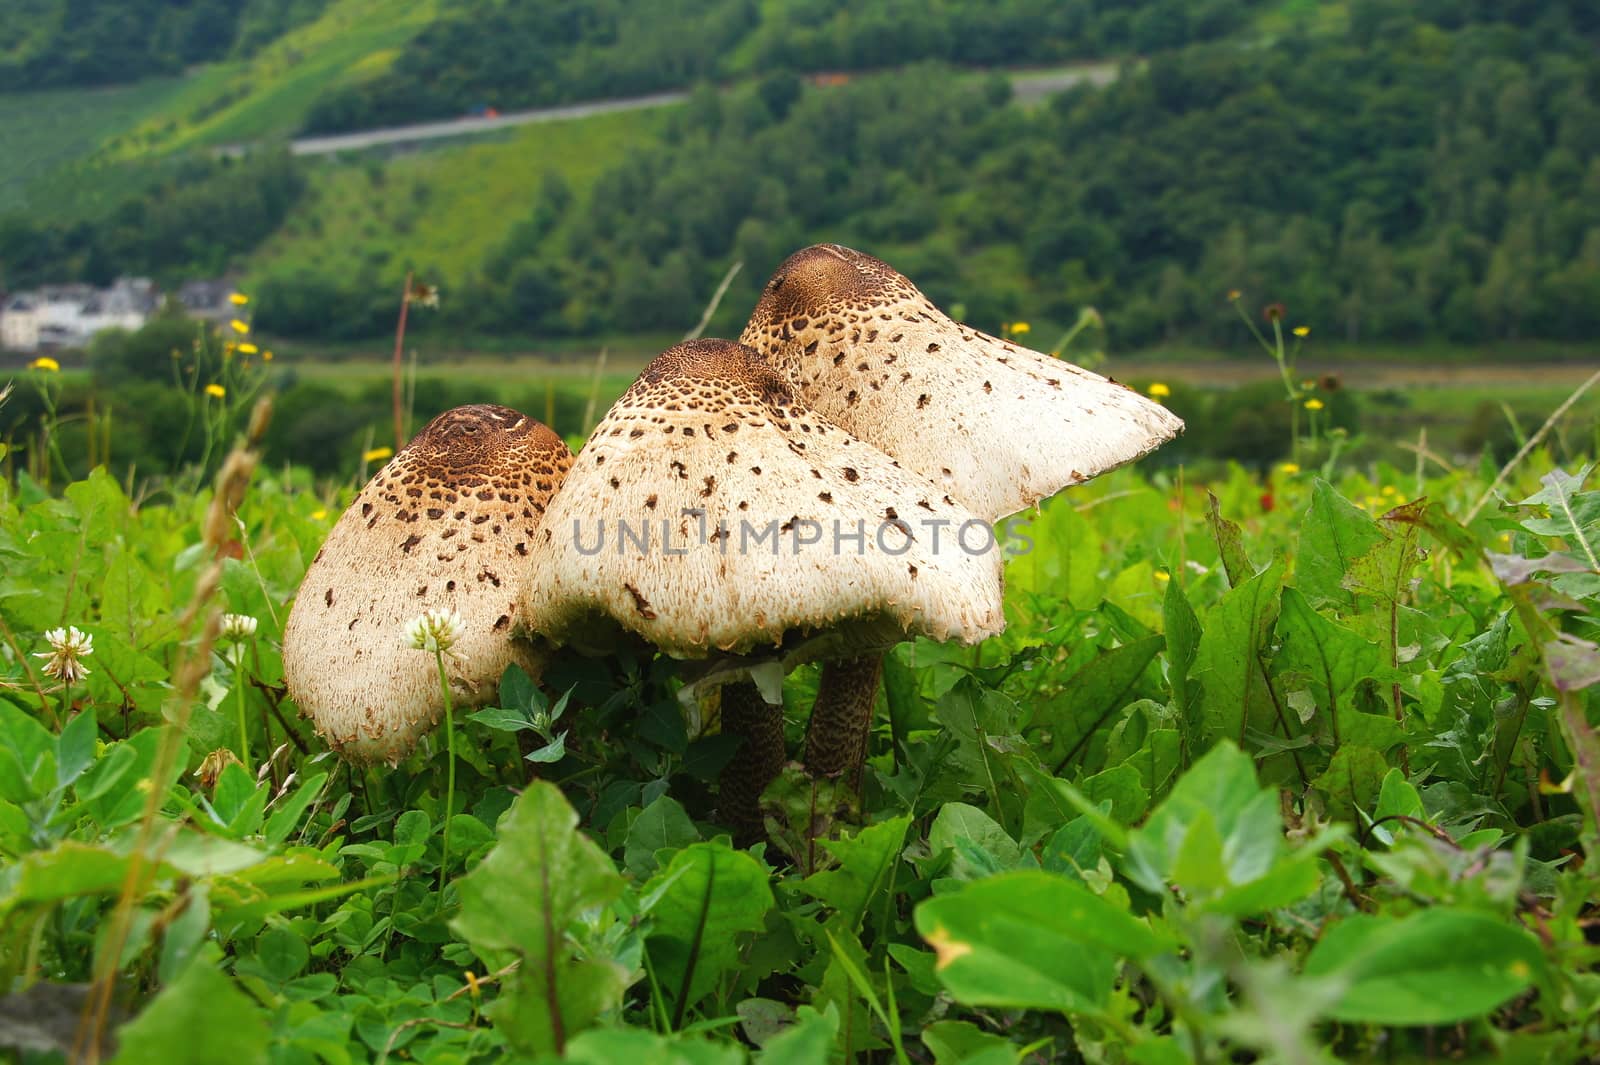 parasol mushrooms in the grass